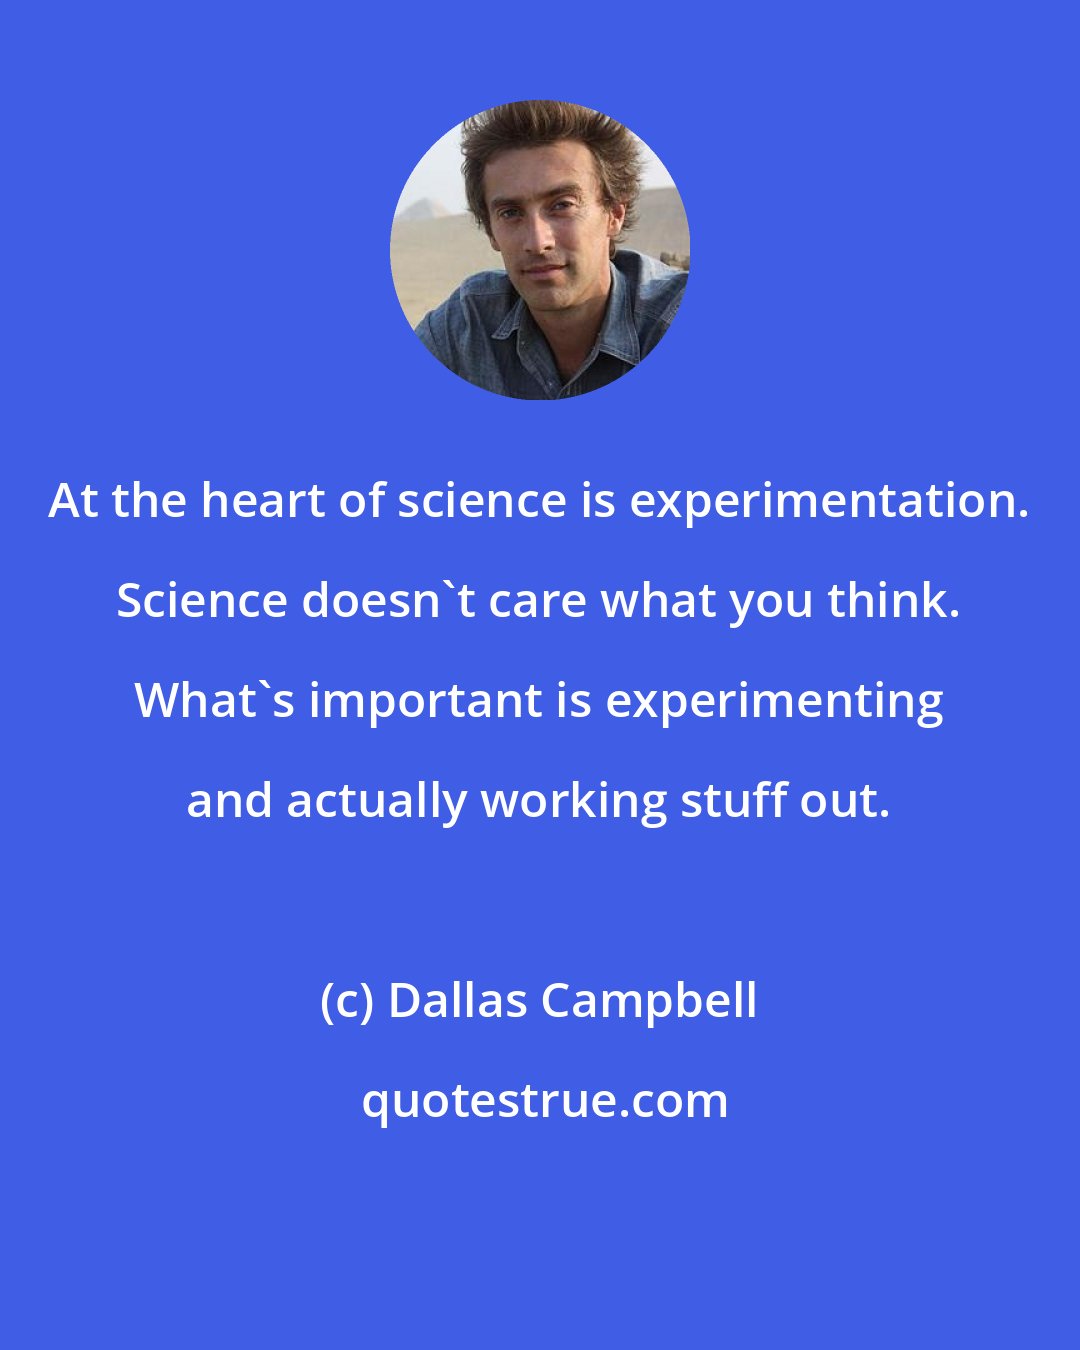 Dallas Campbell: At the heart of science is experimentation. Science doesn't care what you think. What's important is experimenting and actually working stuff out.